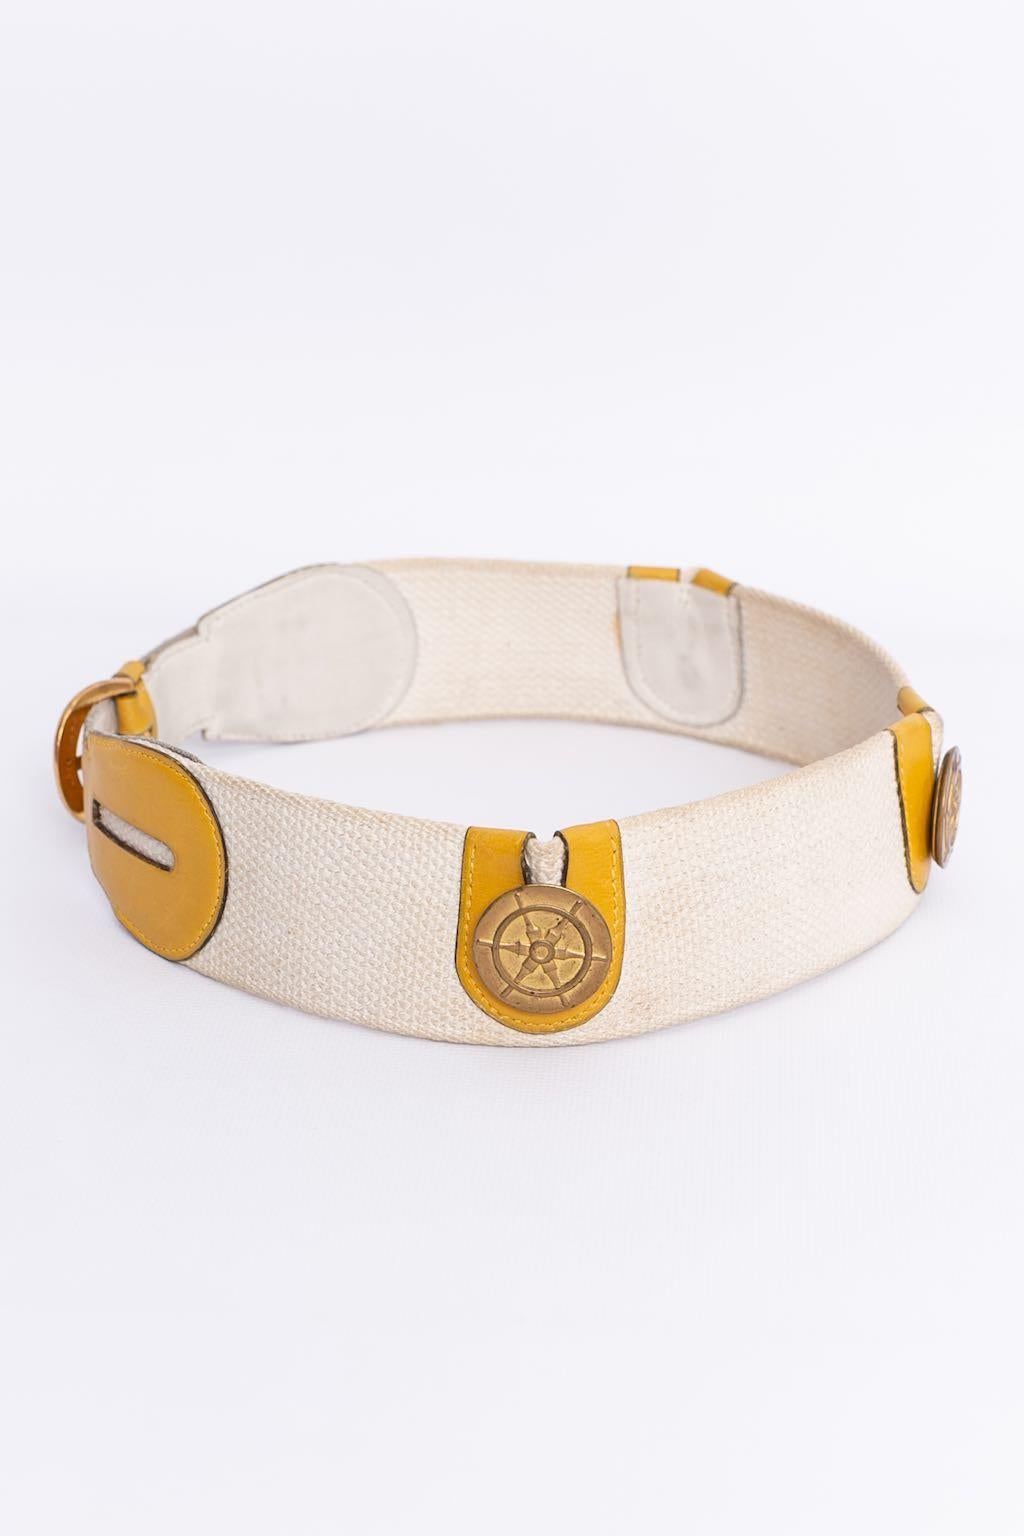 Hermes Paris - Canvas Belt With Yellow Leather, Adorned With Gilted Metal Elements.

Additional information: 
Dimensions: Size 70
Condition: Good condition. Some oxidation upon the metal and stains upon the canvas.
Seller Ref number: ACC103